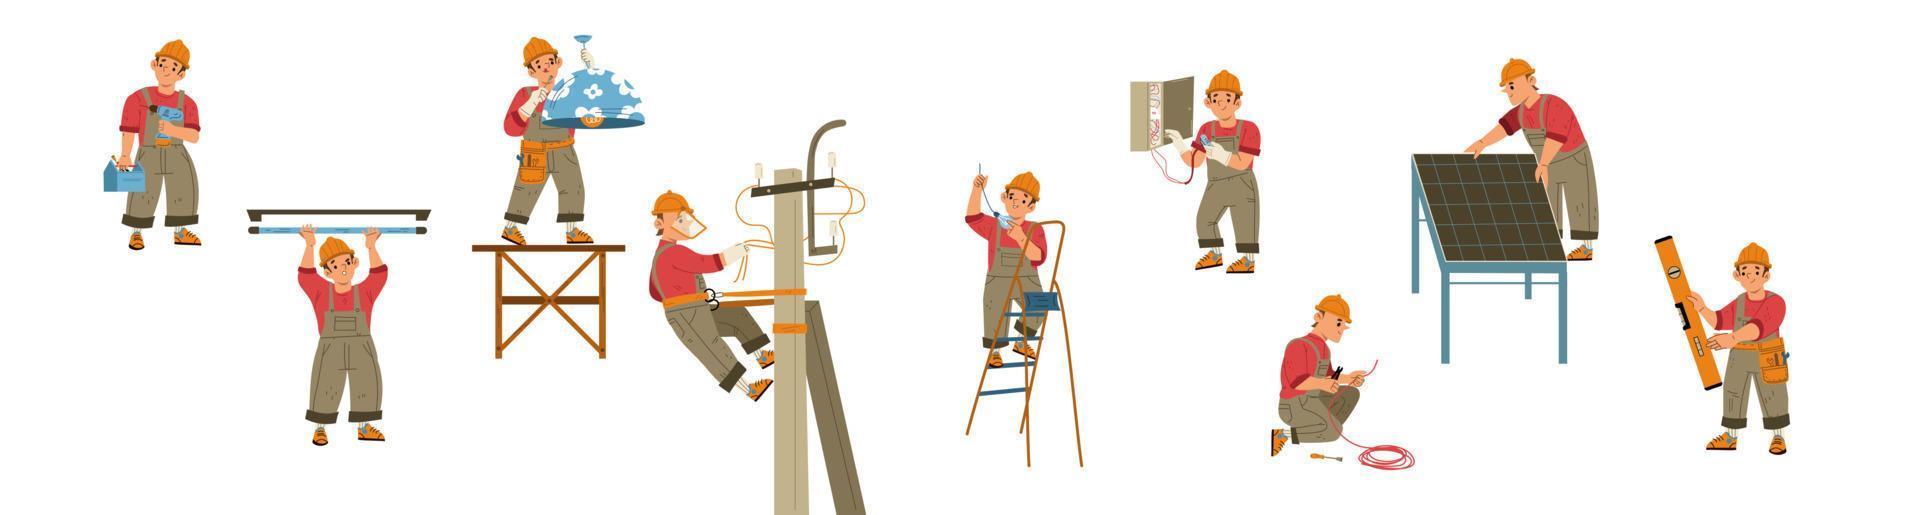 Electrician at work flat illustration set on white vector